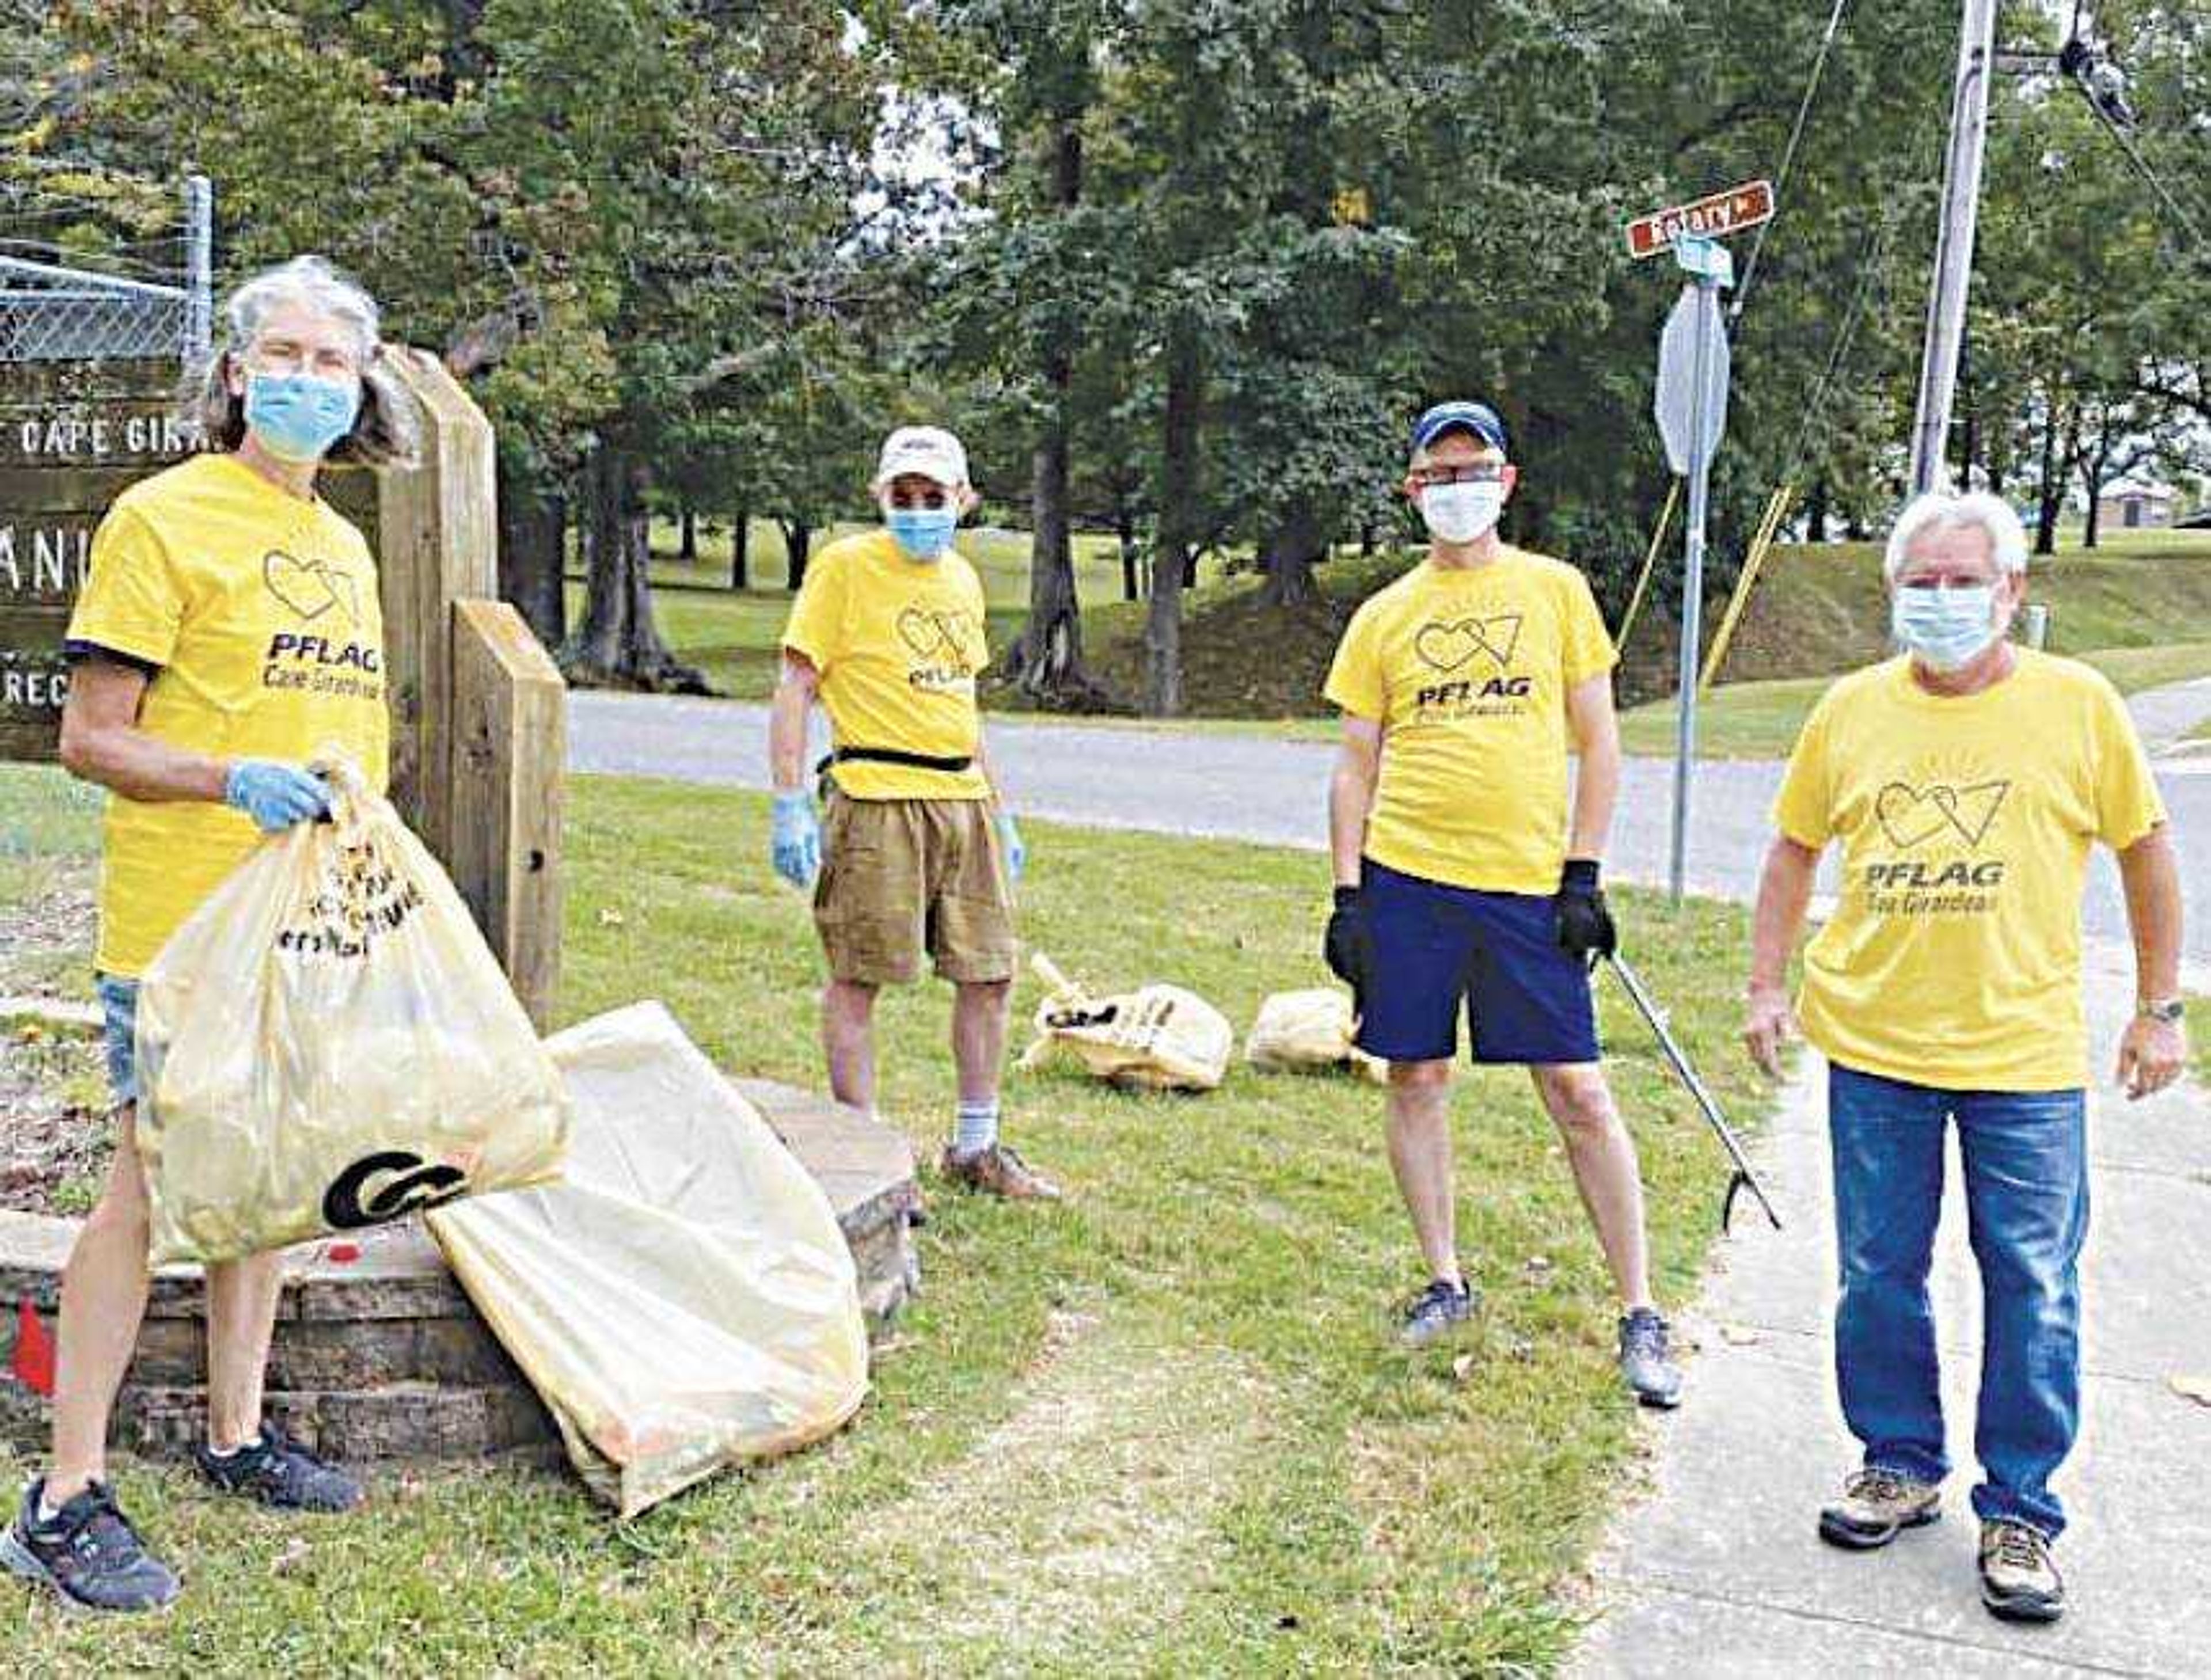 PFLAG members gather during a monthly trash pickup. From left to right, PFLAG board member Mary Maginel, president Jim Maginel, board member Kevin Hampton and board member Jim Dale.